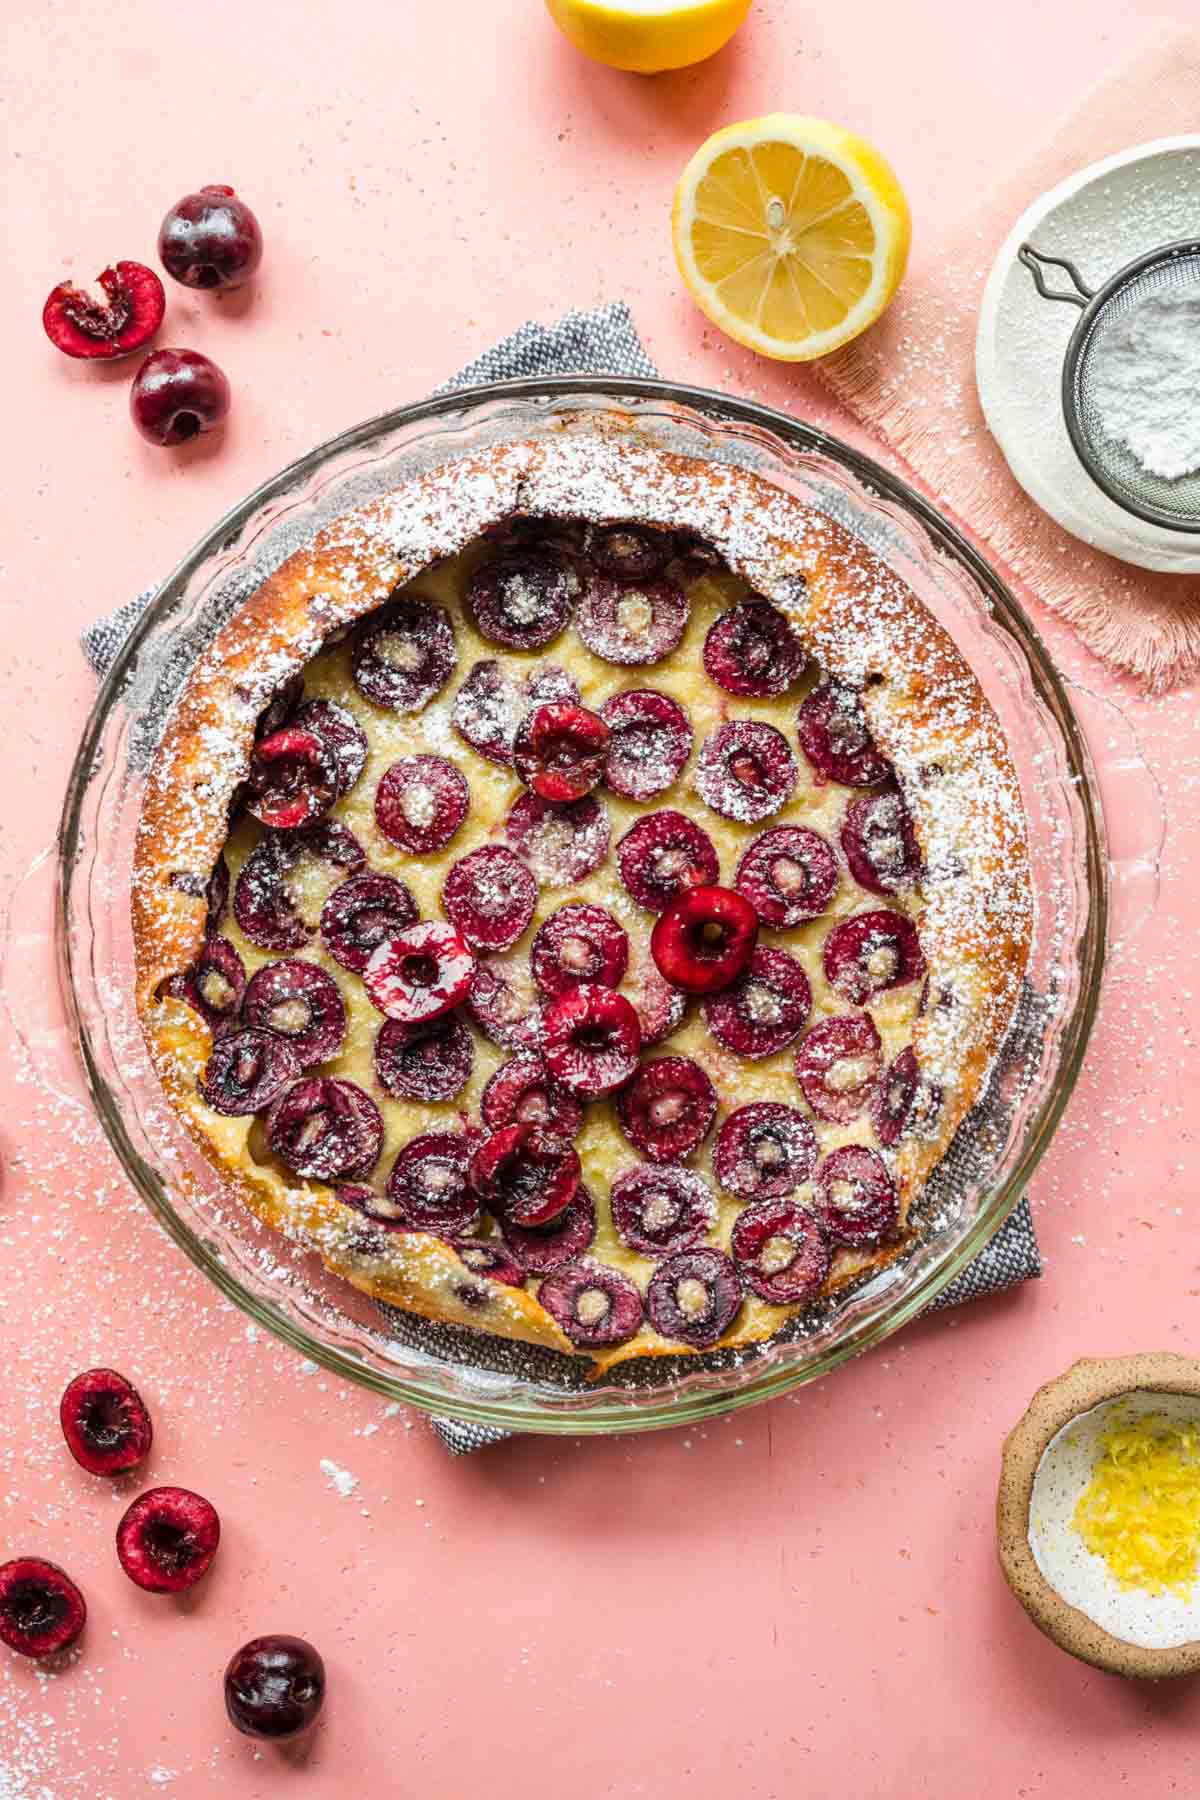 Cherry Clafoutis baked in dish with lemons and cherries surrounding the dish, pink background with ingredient decorations